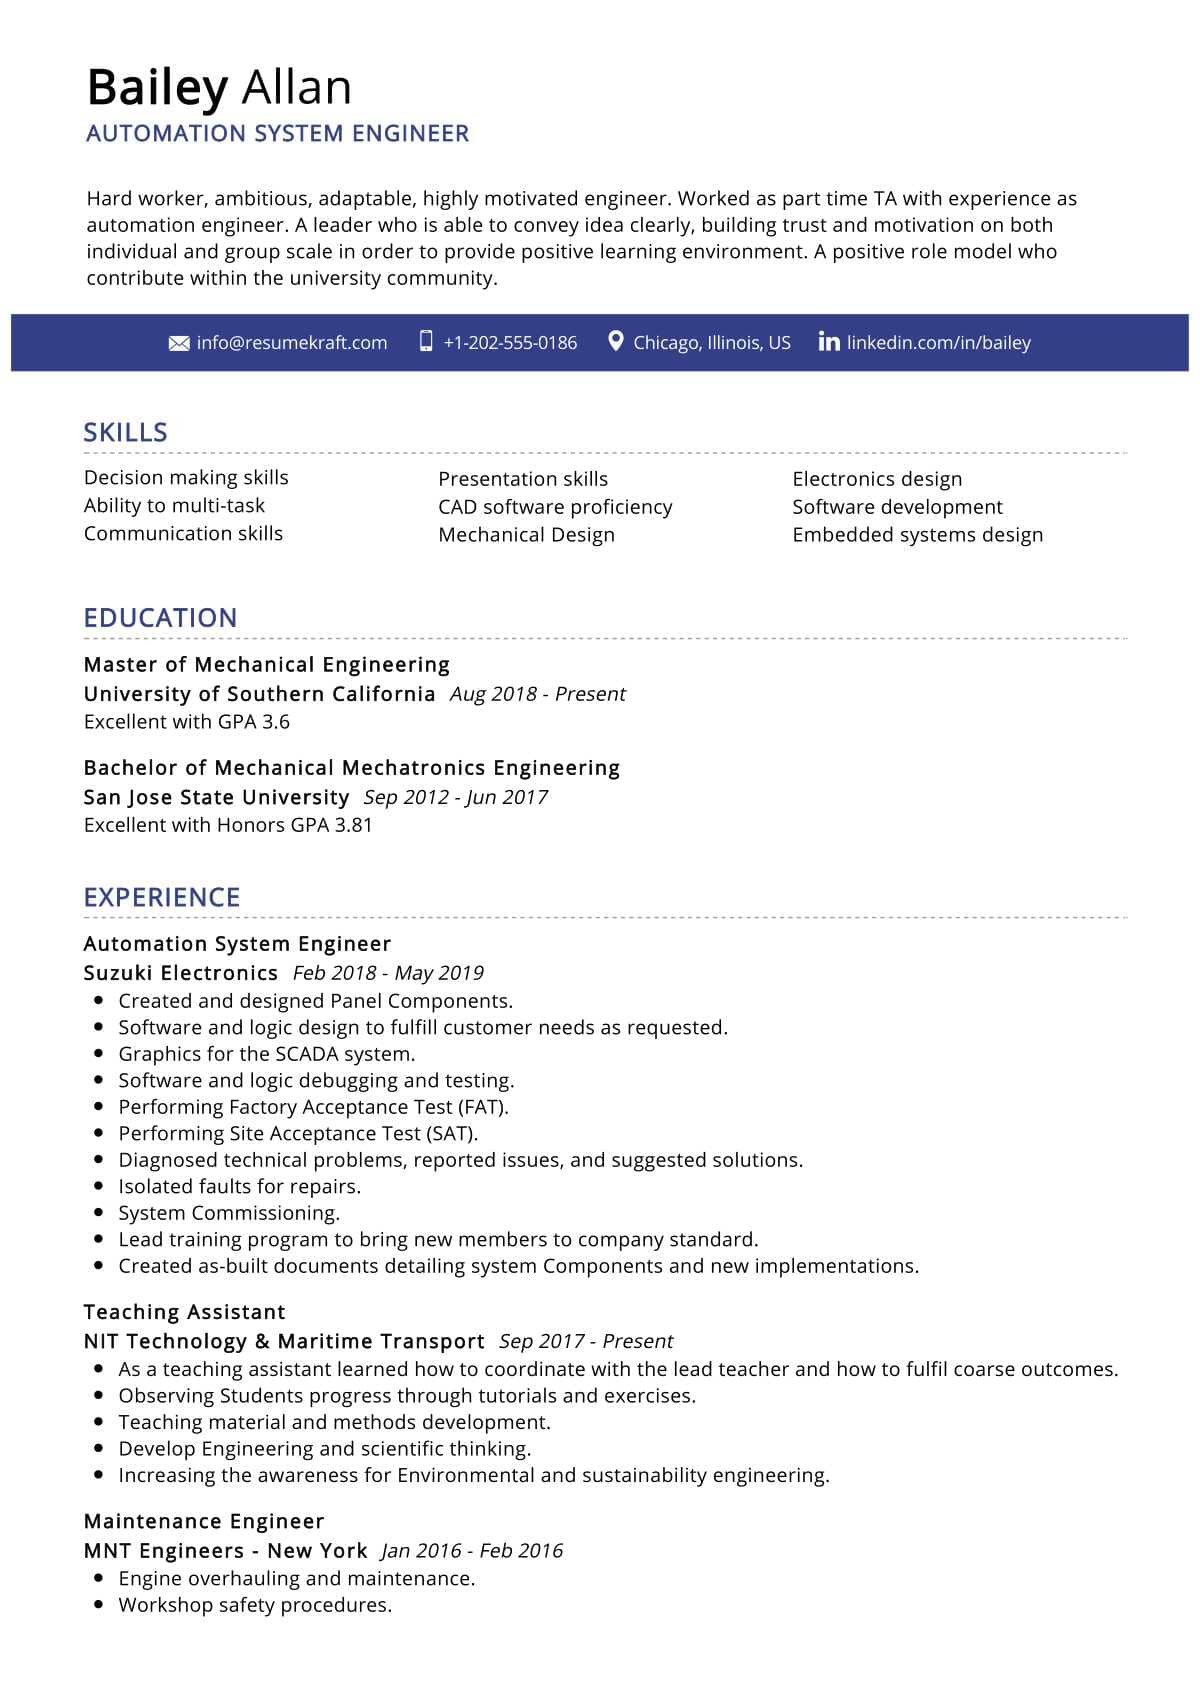 Sample Resume for Building Automation Engineer Automation System Engineer Resume Sample 2022 Writing Tips …